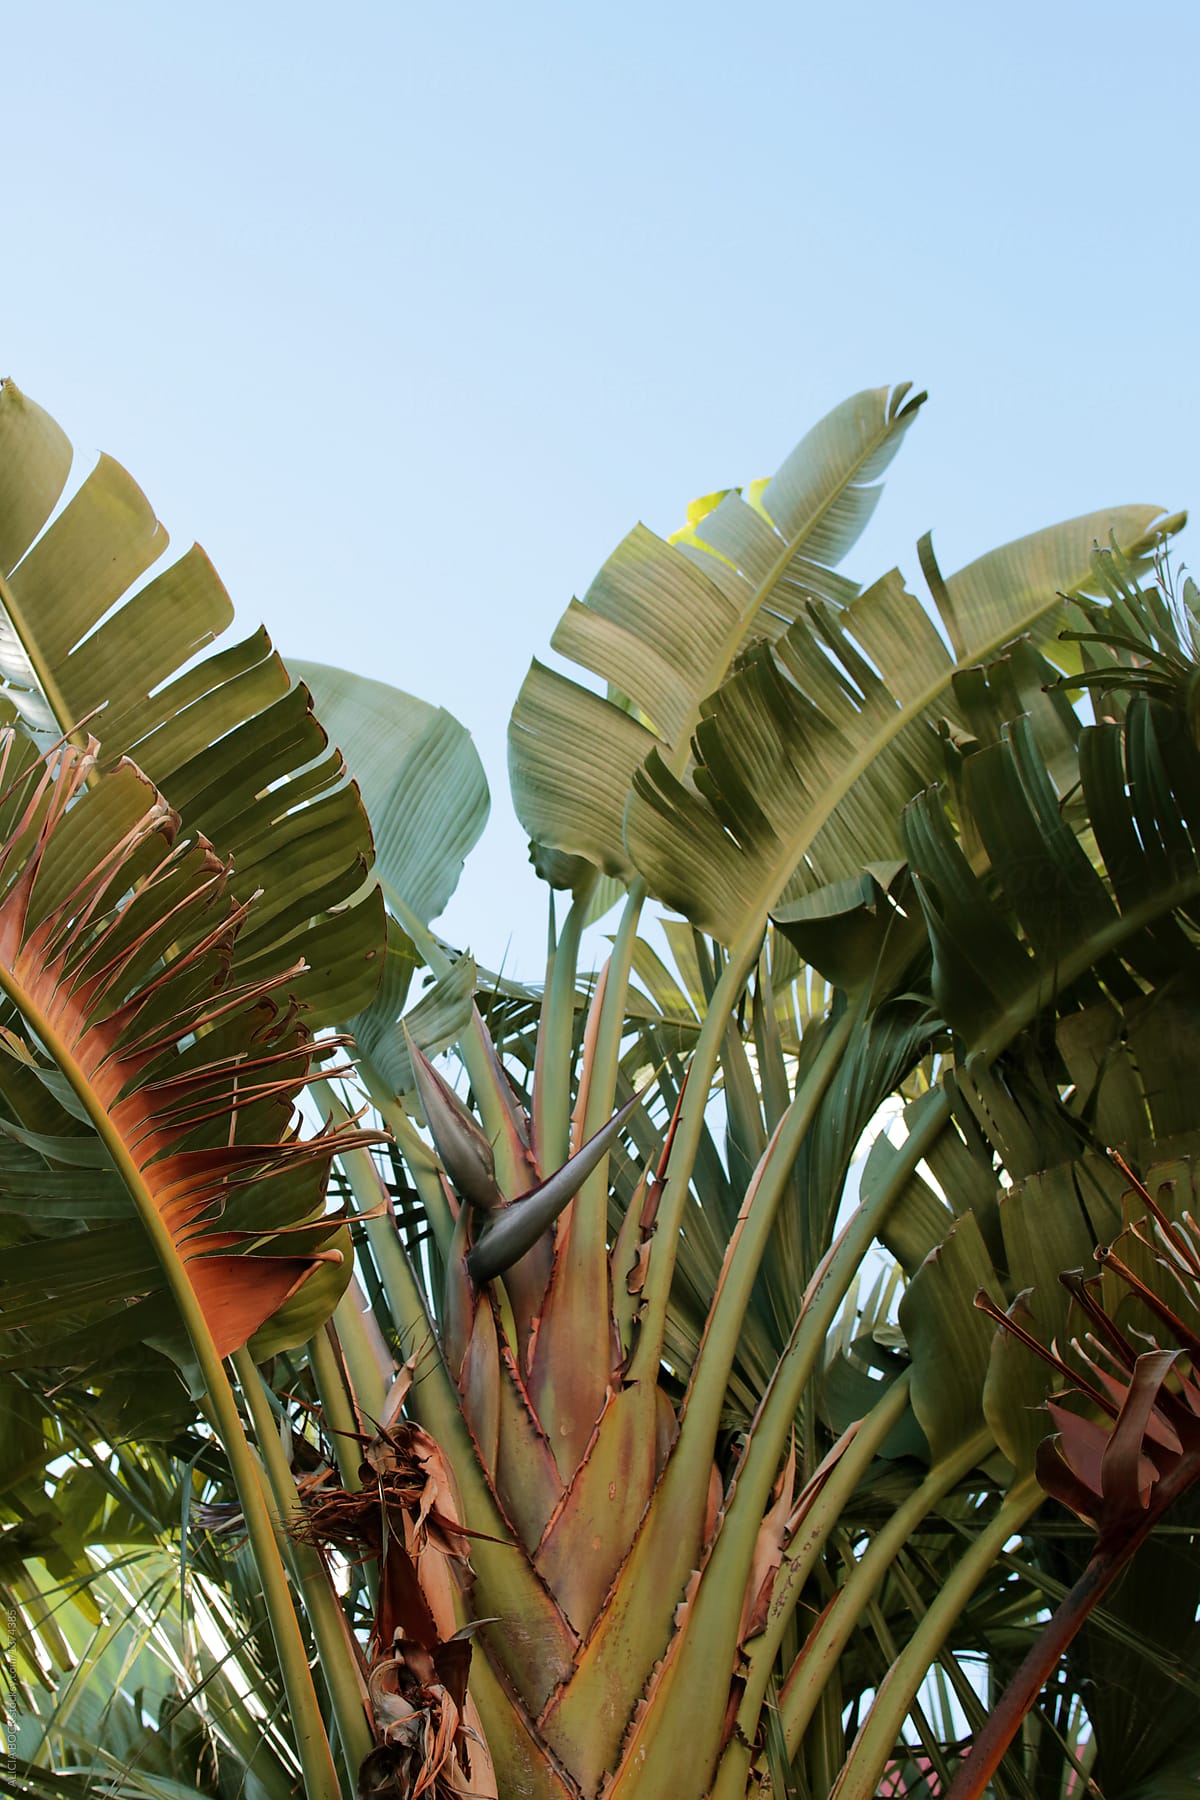 Vibrant Large Banana Tree Leaves Against A Bright Blue Sky